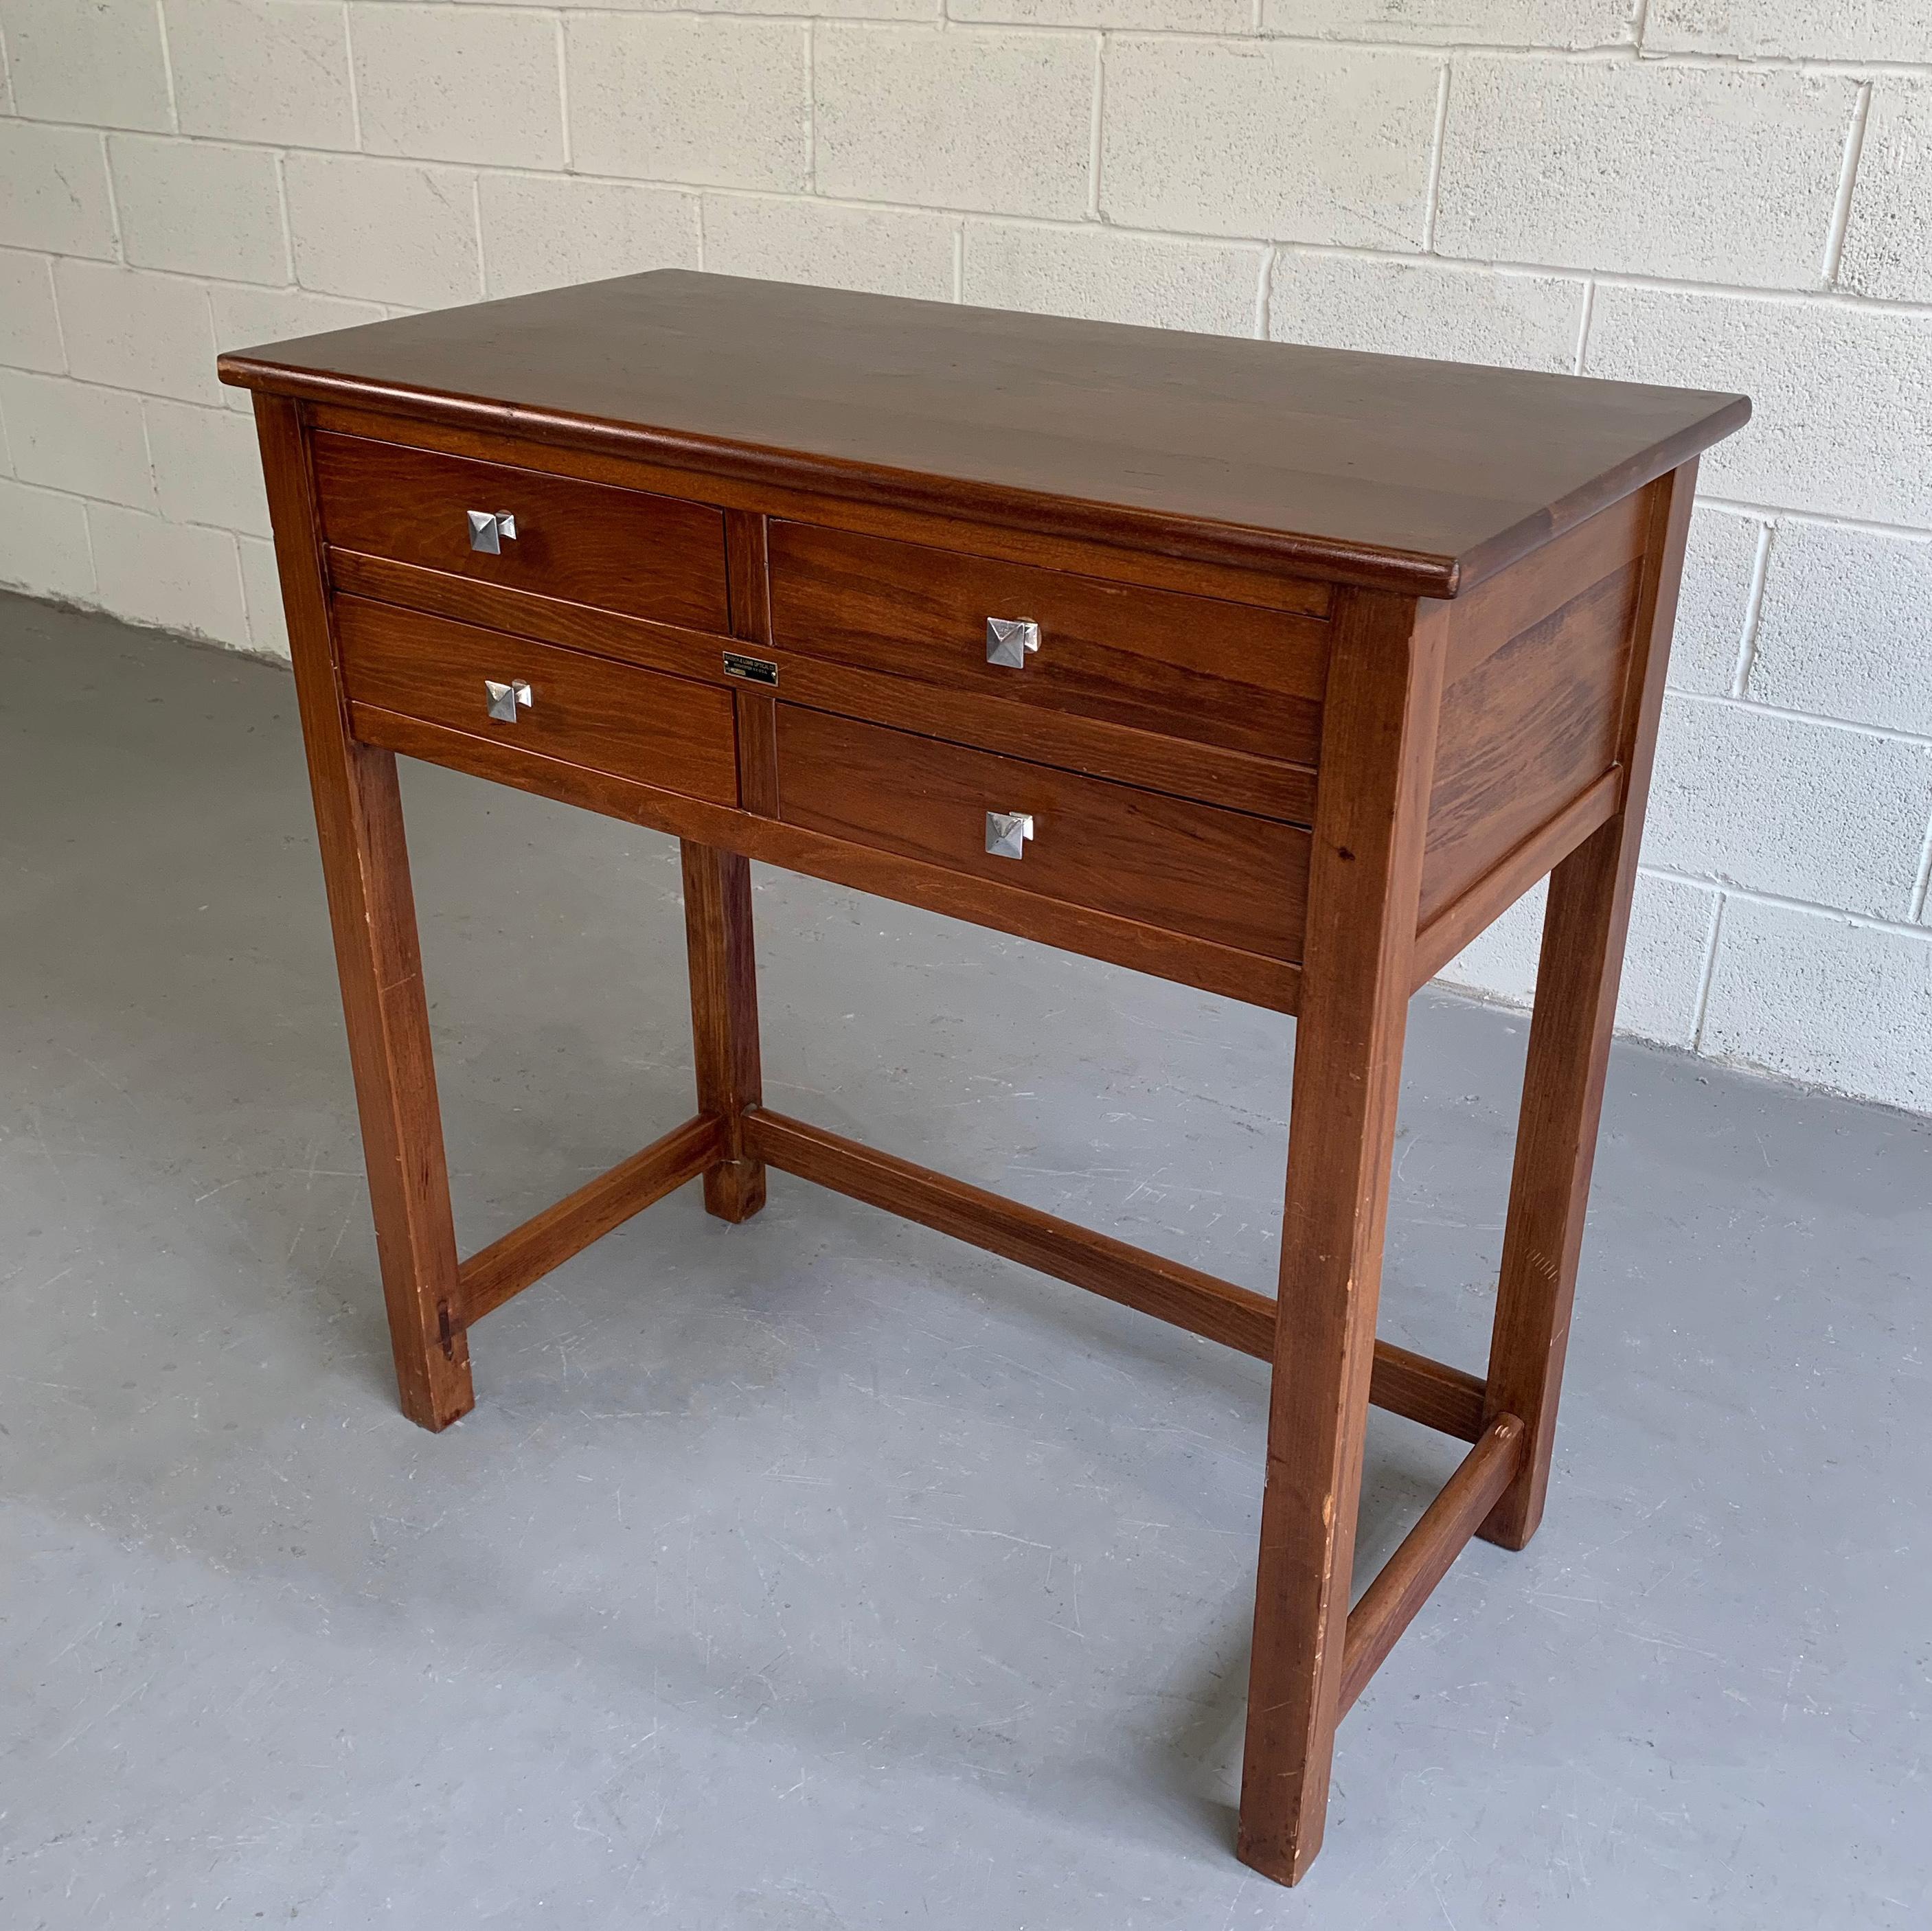 Early 20th century, mahogany, eye examination, console table by Bausch & Lomb features 4 drawers at 14 inches wide and 3 inches height with chrome pulls.